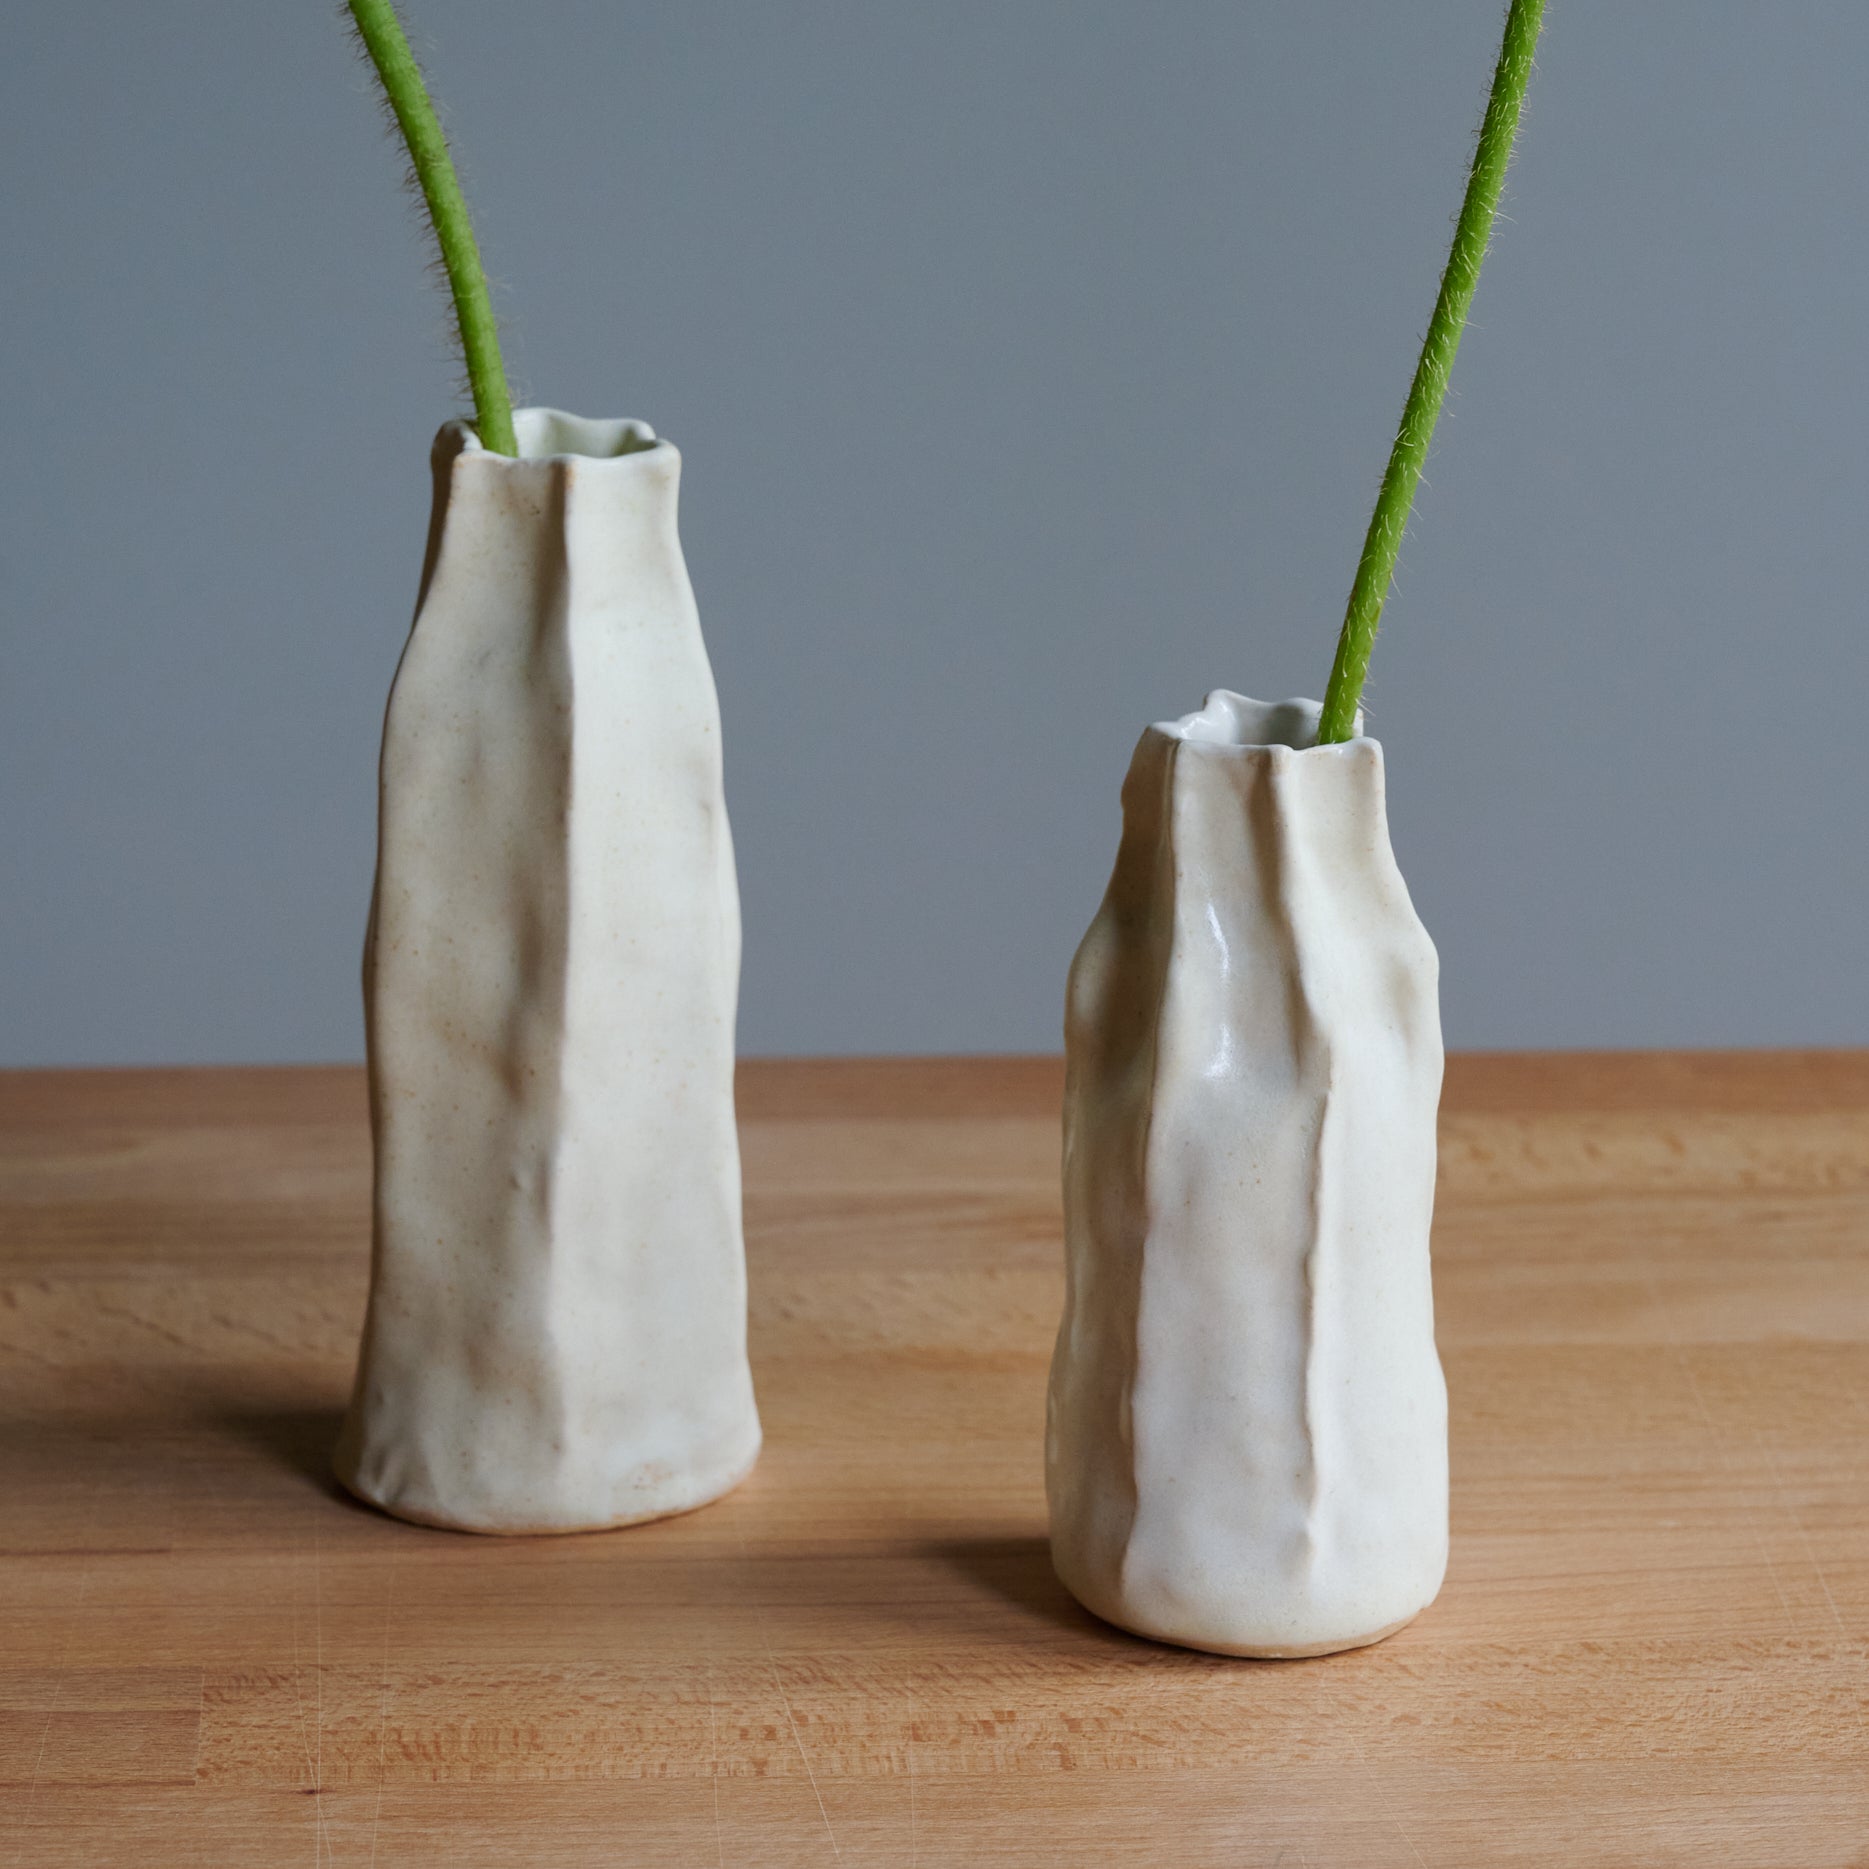 Two matte white handmade ceramic vases with irregular but beautifully formed ridges sitting on a light wood table top. Hairy bright green flower stems are seen coming out of the vases.